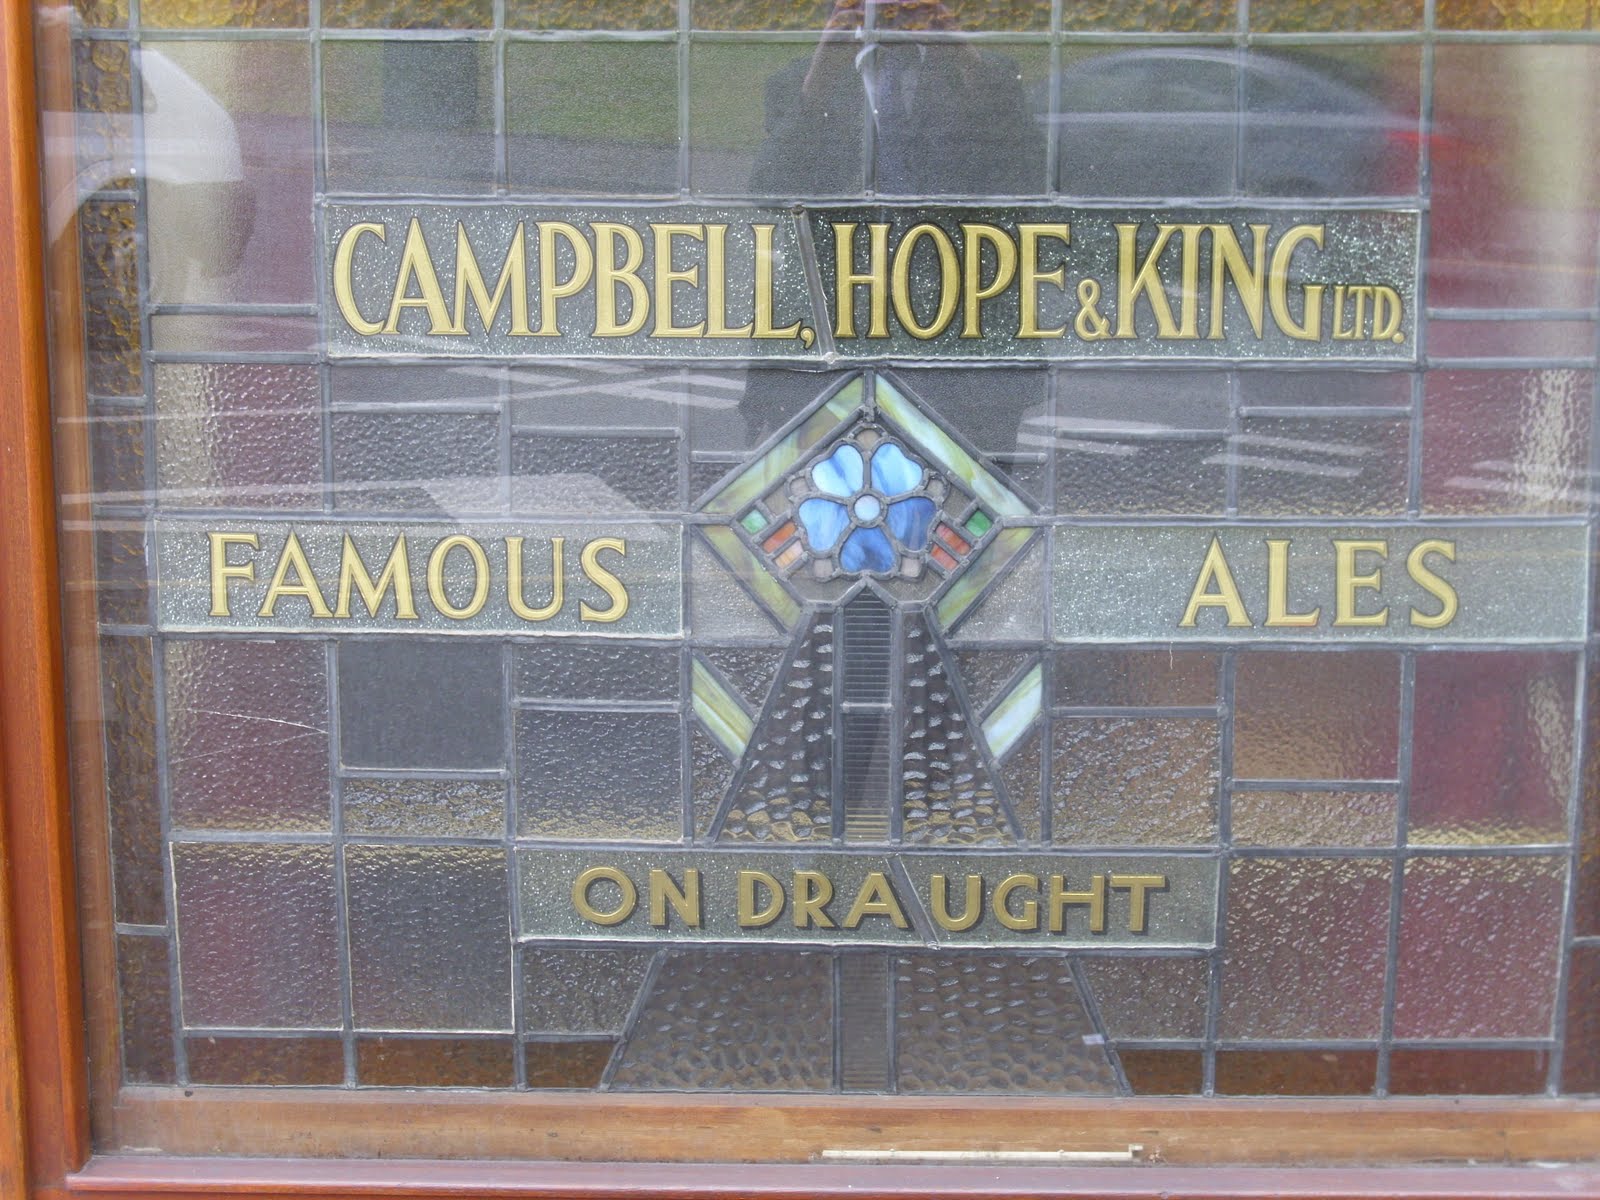 Image result for campbell hope and king beer